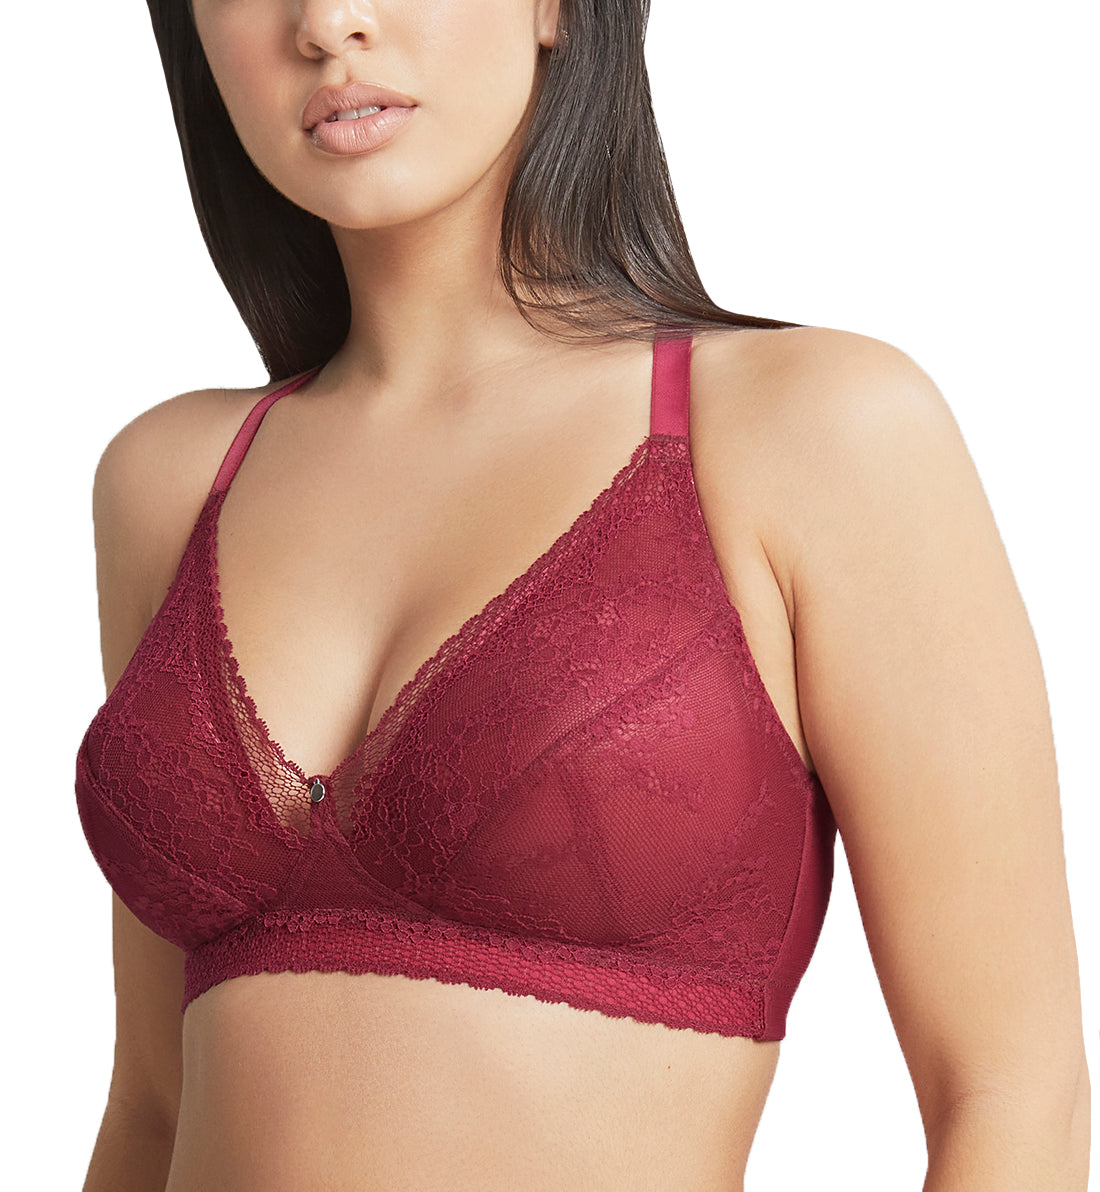 Cleo by Panache Alexis High Apex Non-Wired Bralette (10476),28F,Berry - Berry,28F